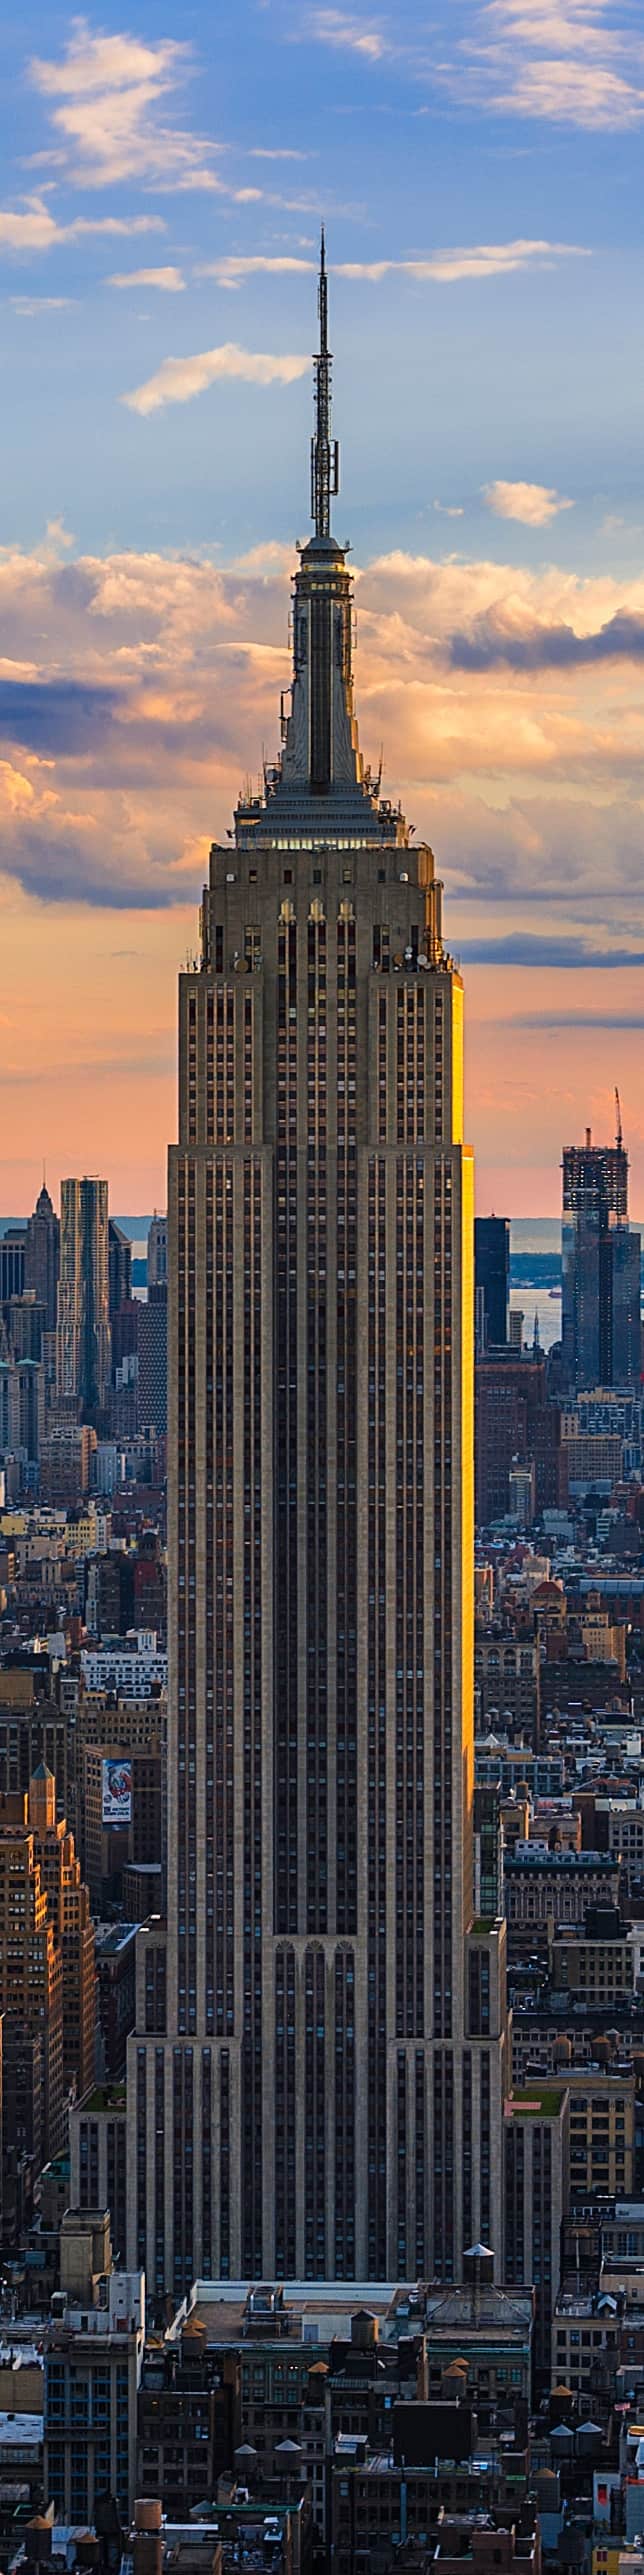 #28 The Empire State Building is a 102 story skyscraper  